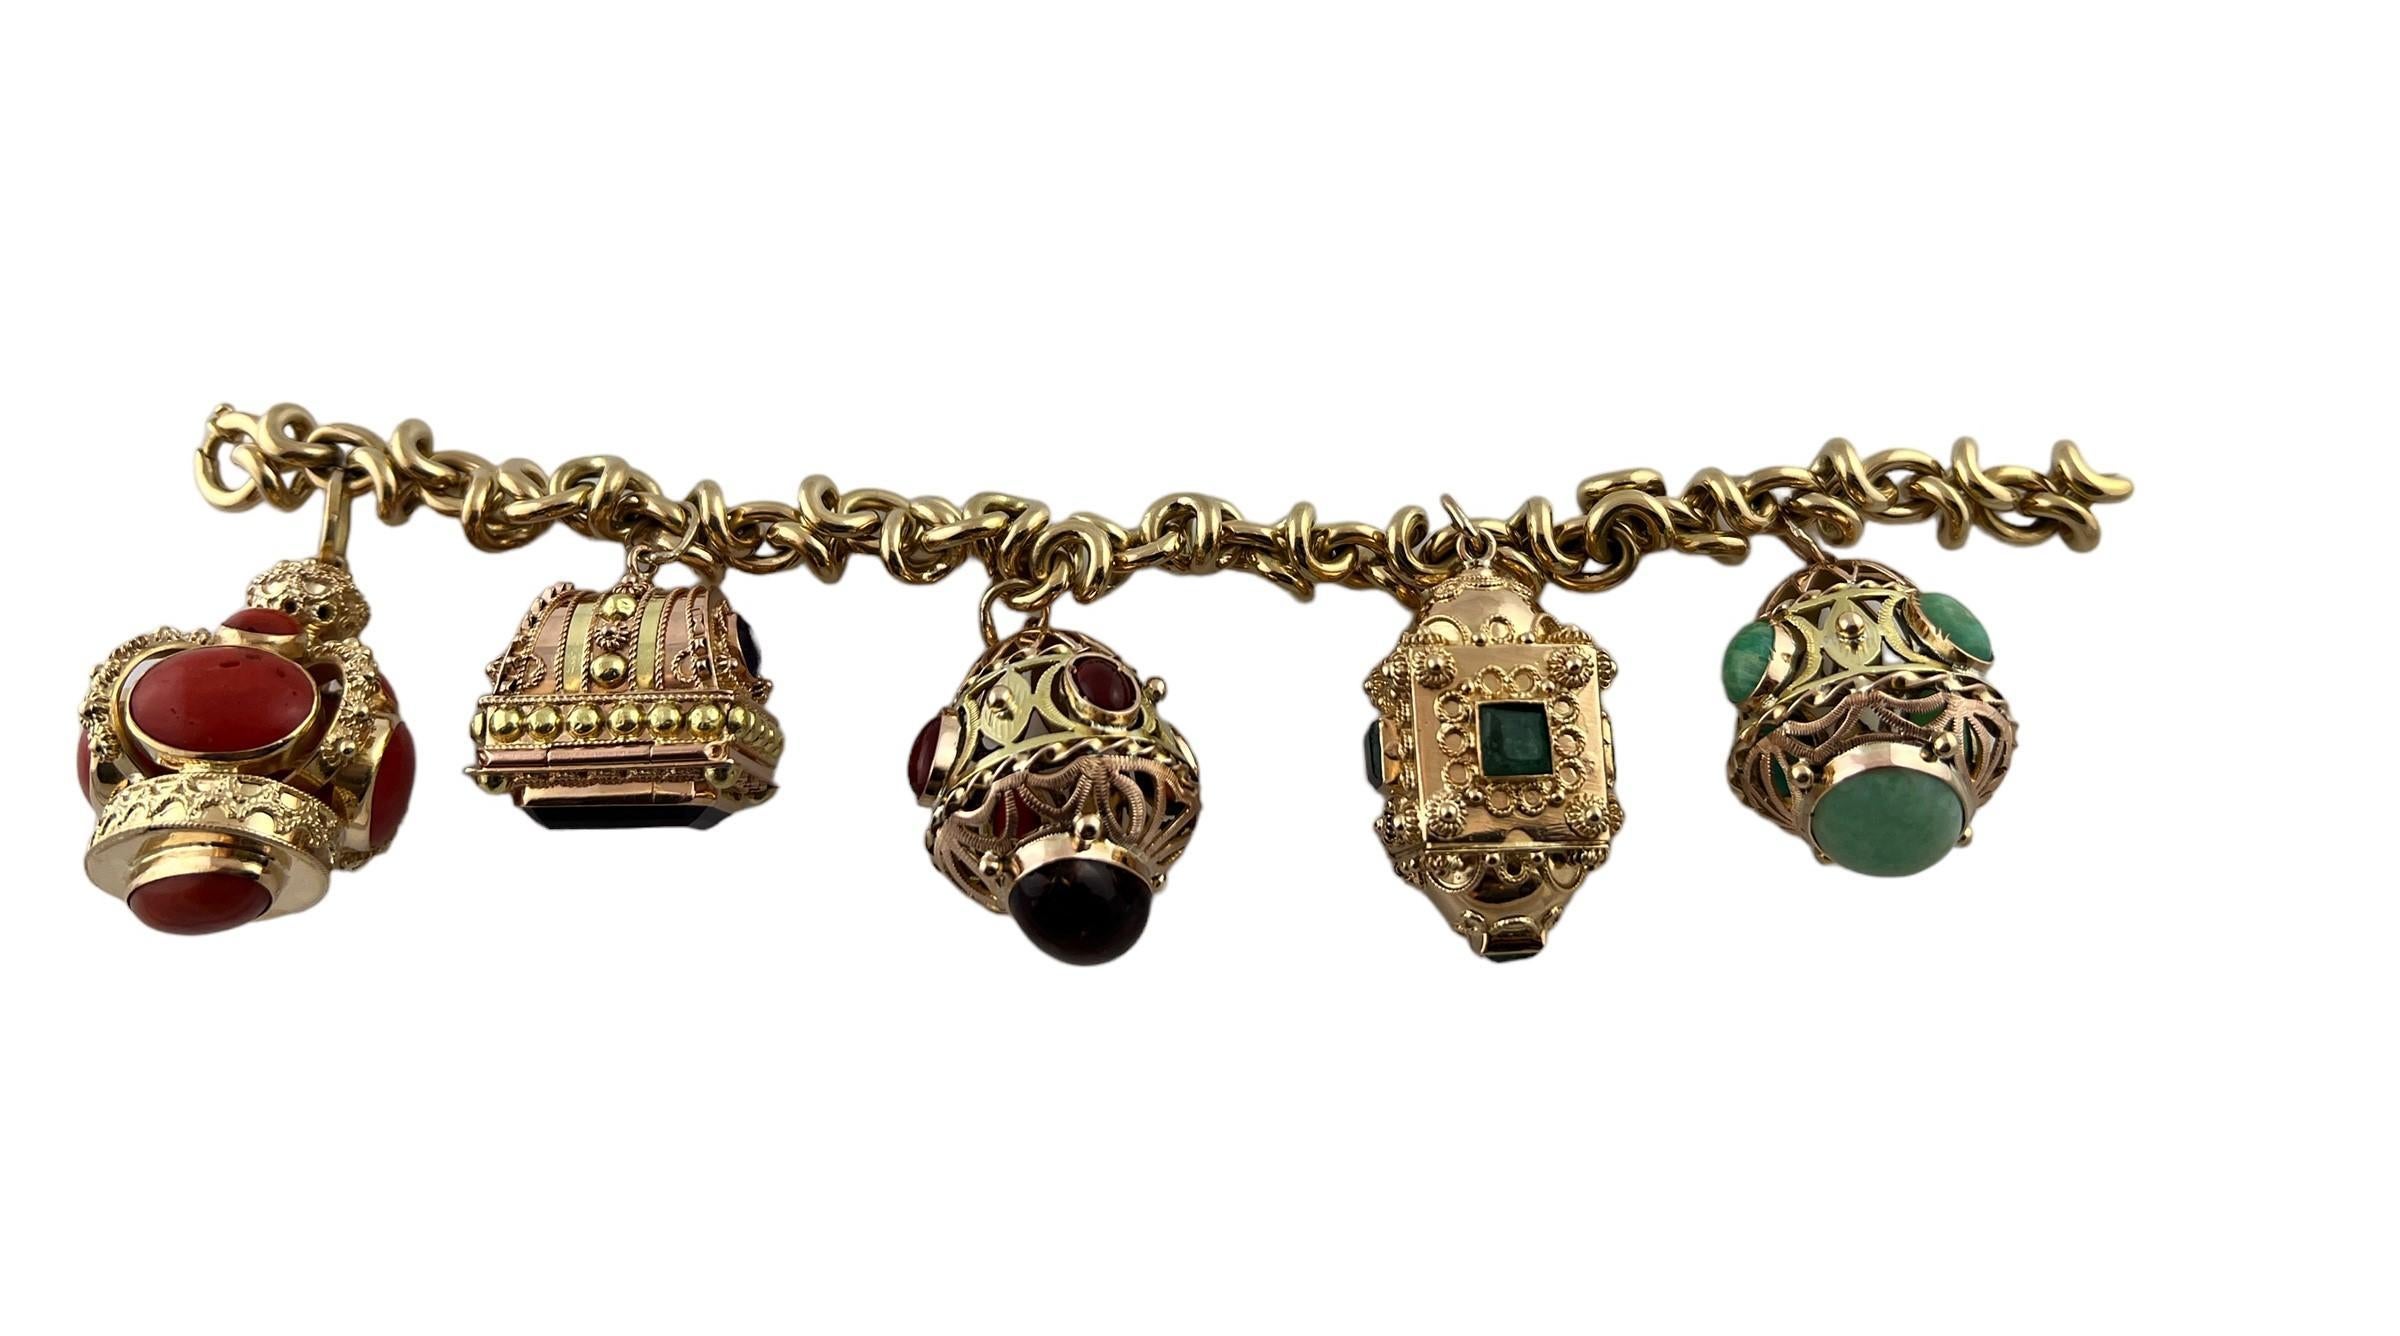 This beautiful mid century modern Etruscan revival bracelet is set in 18K yellow gold. 

This heavy bracelet is set with assorted semi precious stones. - light scratching, chips to some stones as shown

2 of the charms open as shown. 

8